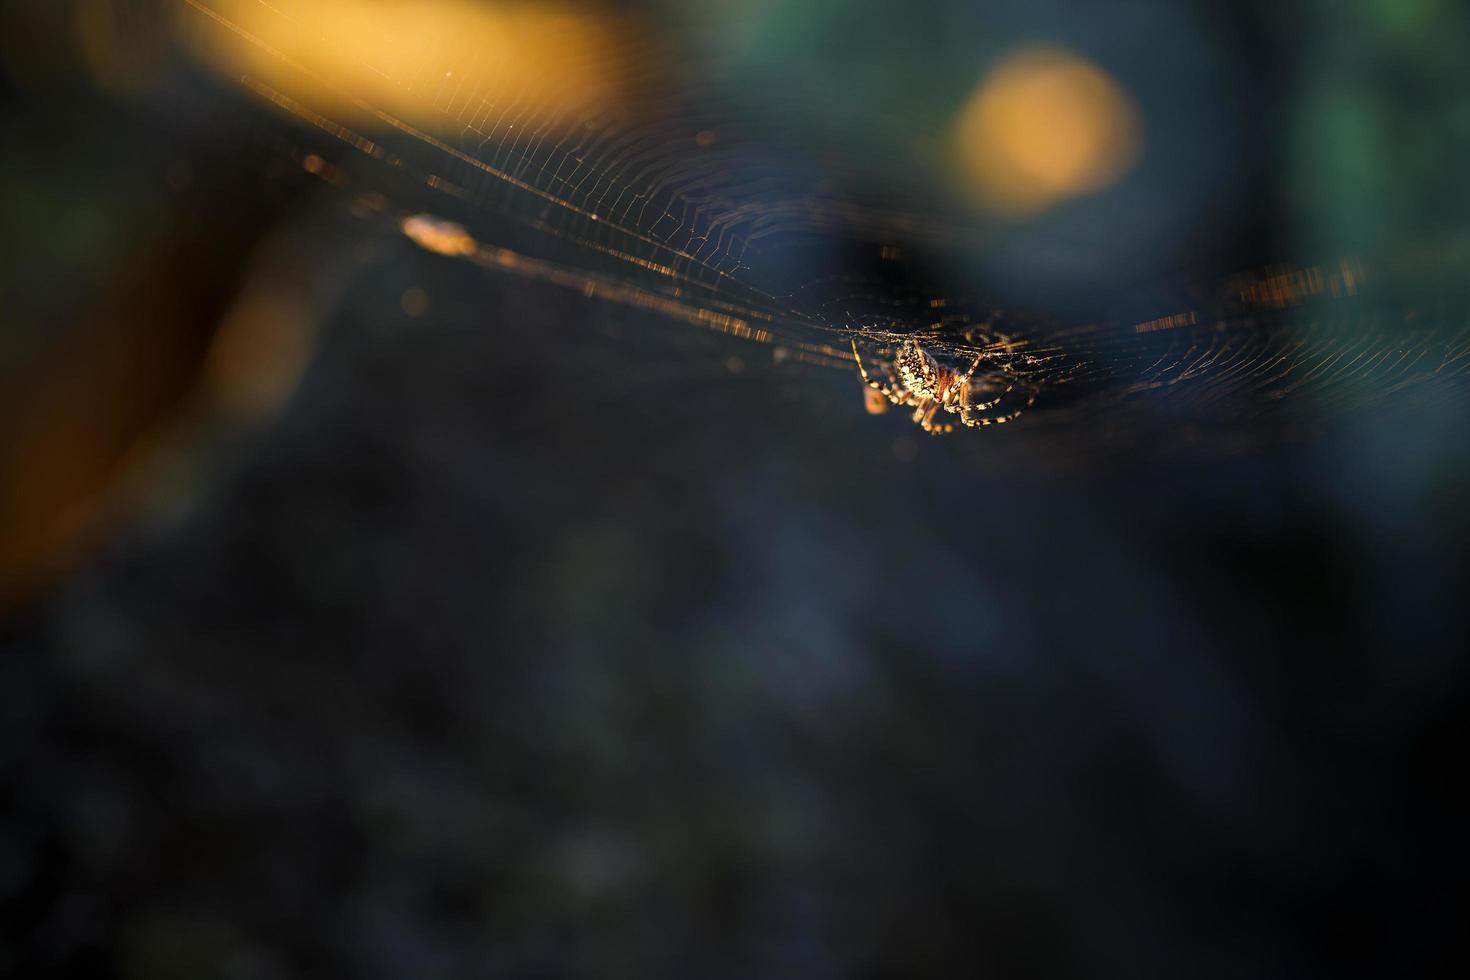 Spider on a web in the sun, in the forest photo